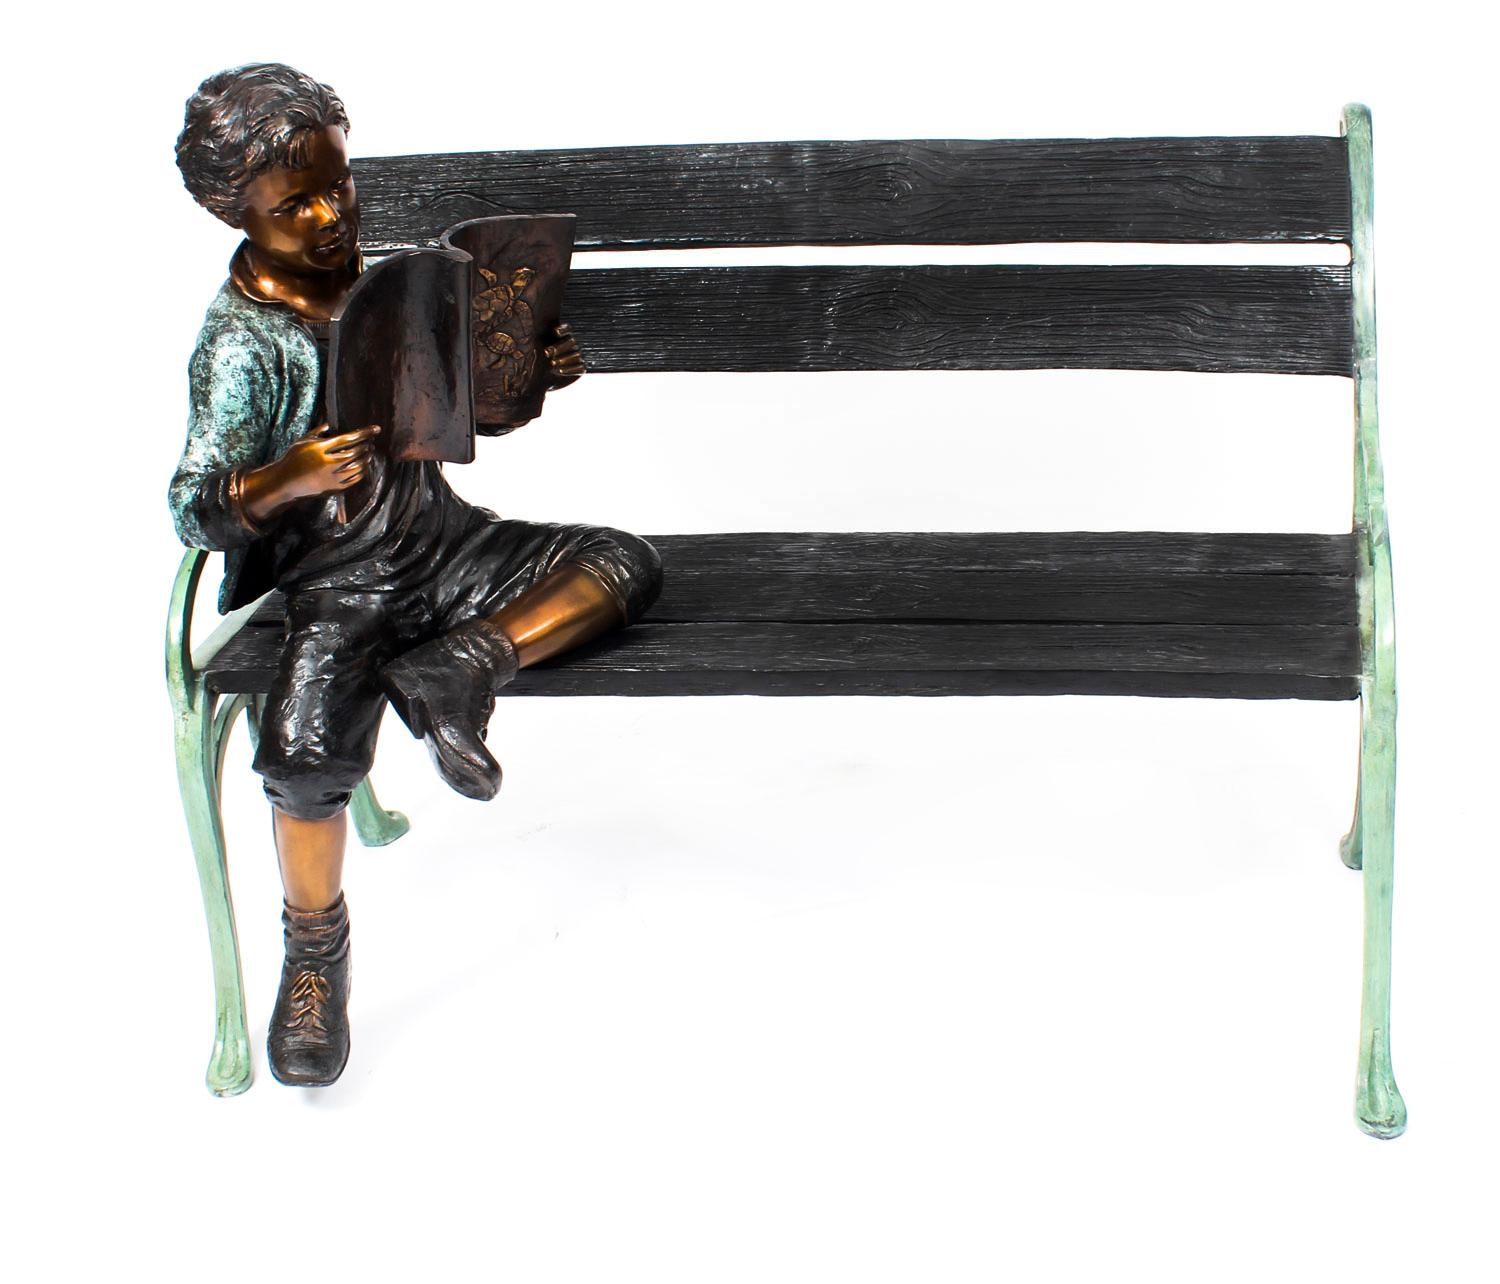 There is no mistaking the unique quality and style of this exquisite lifesize statue of a boy reading while sitting casually on a outdoor bench, dating from the last quarter of the 20th century.

It will soon become the focal point of your garden